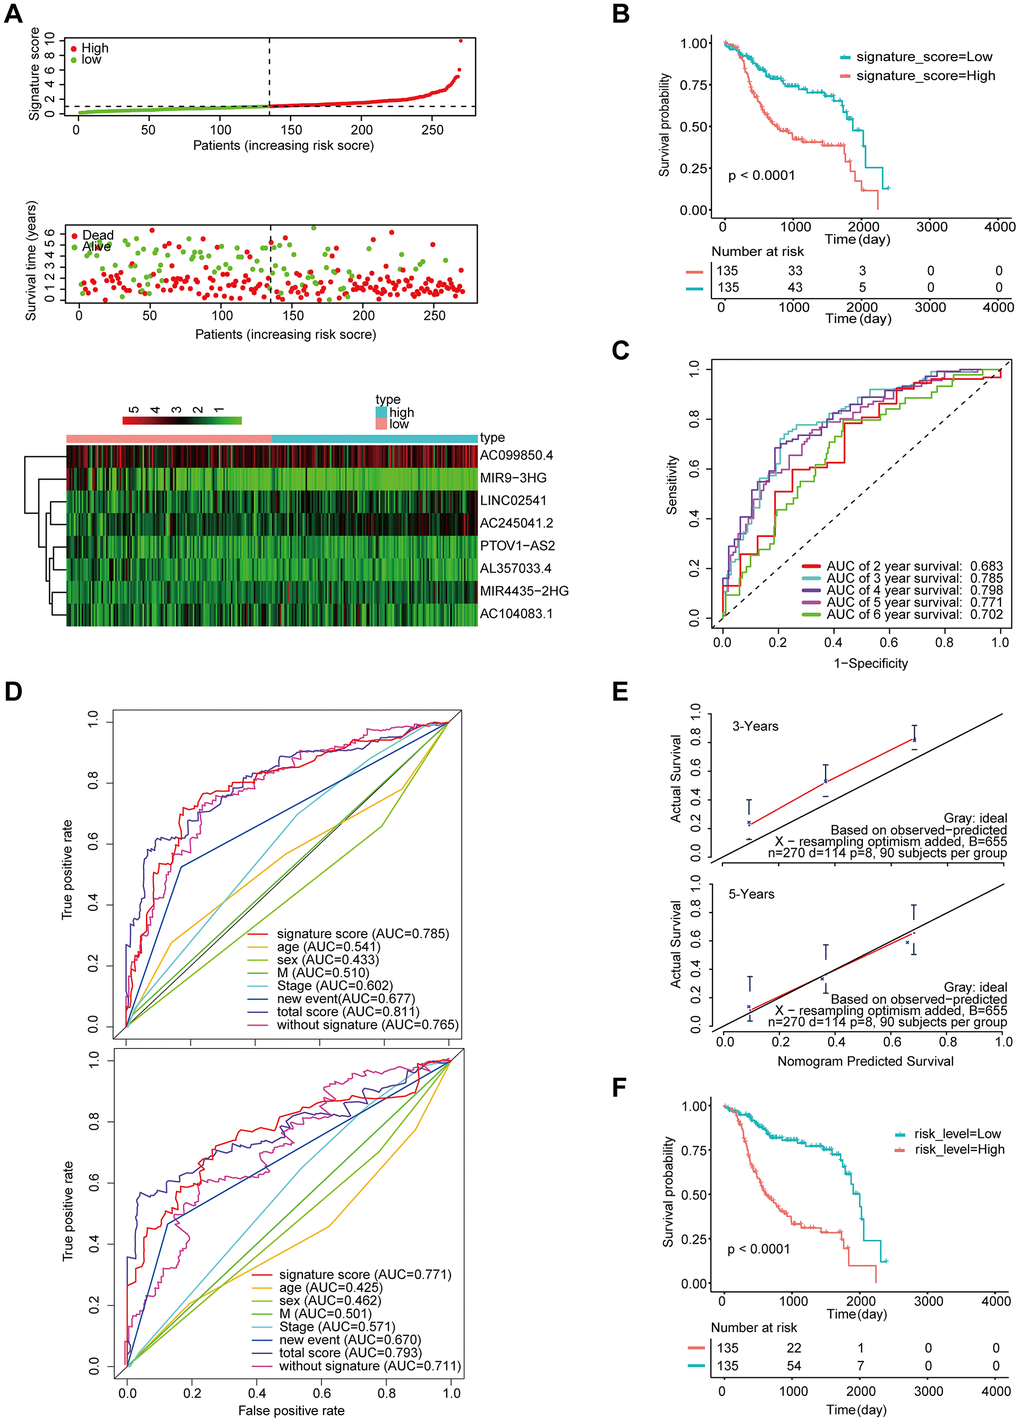 Validation of the model by the external validation set GSE65858 (n=270). (A) Distribution of 8-lncRNA-based signature scores, lncRNA expression levels and patient survival durations in the external validation set. (B) Kaplan-Meier curves of OS based on the 8-lncRNA signature. (C) ROC curve analyses based on the 8-lncRNA signature. (D) ROC curves according to the nomogram and lncRNA signature score. (E) Calibration curves of the nomogram for the estimation of survival rates at 3 and 5 years. (F) Kaplan-Meier curves of OS according to the total risk score.